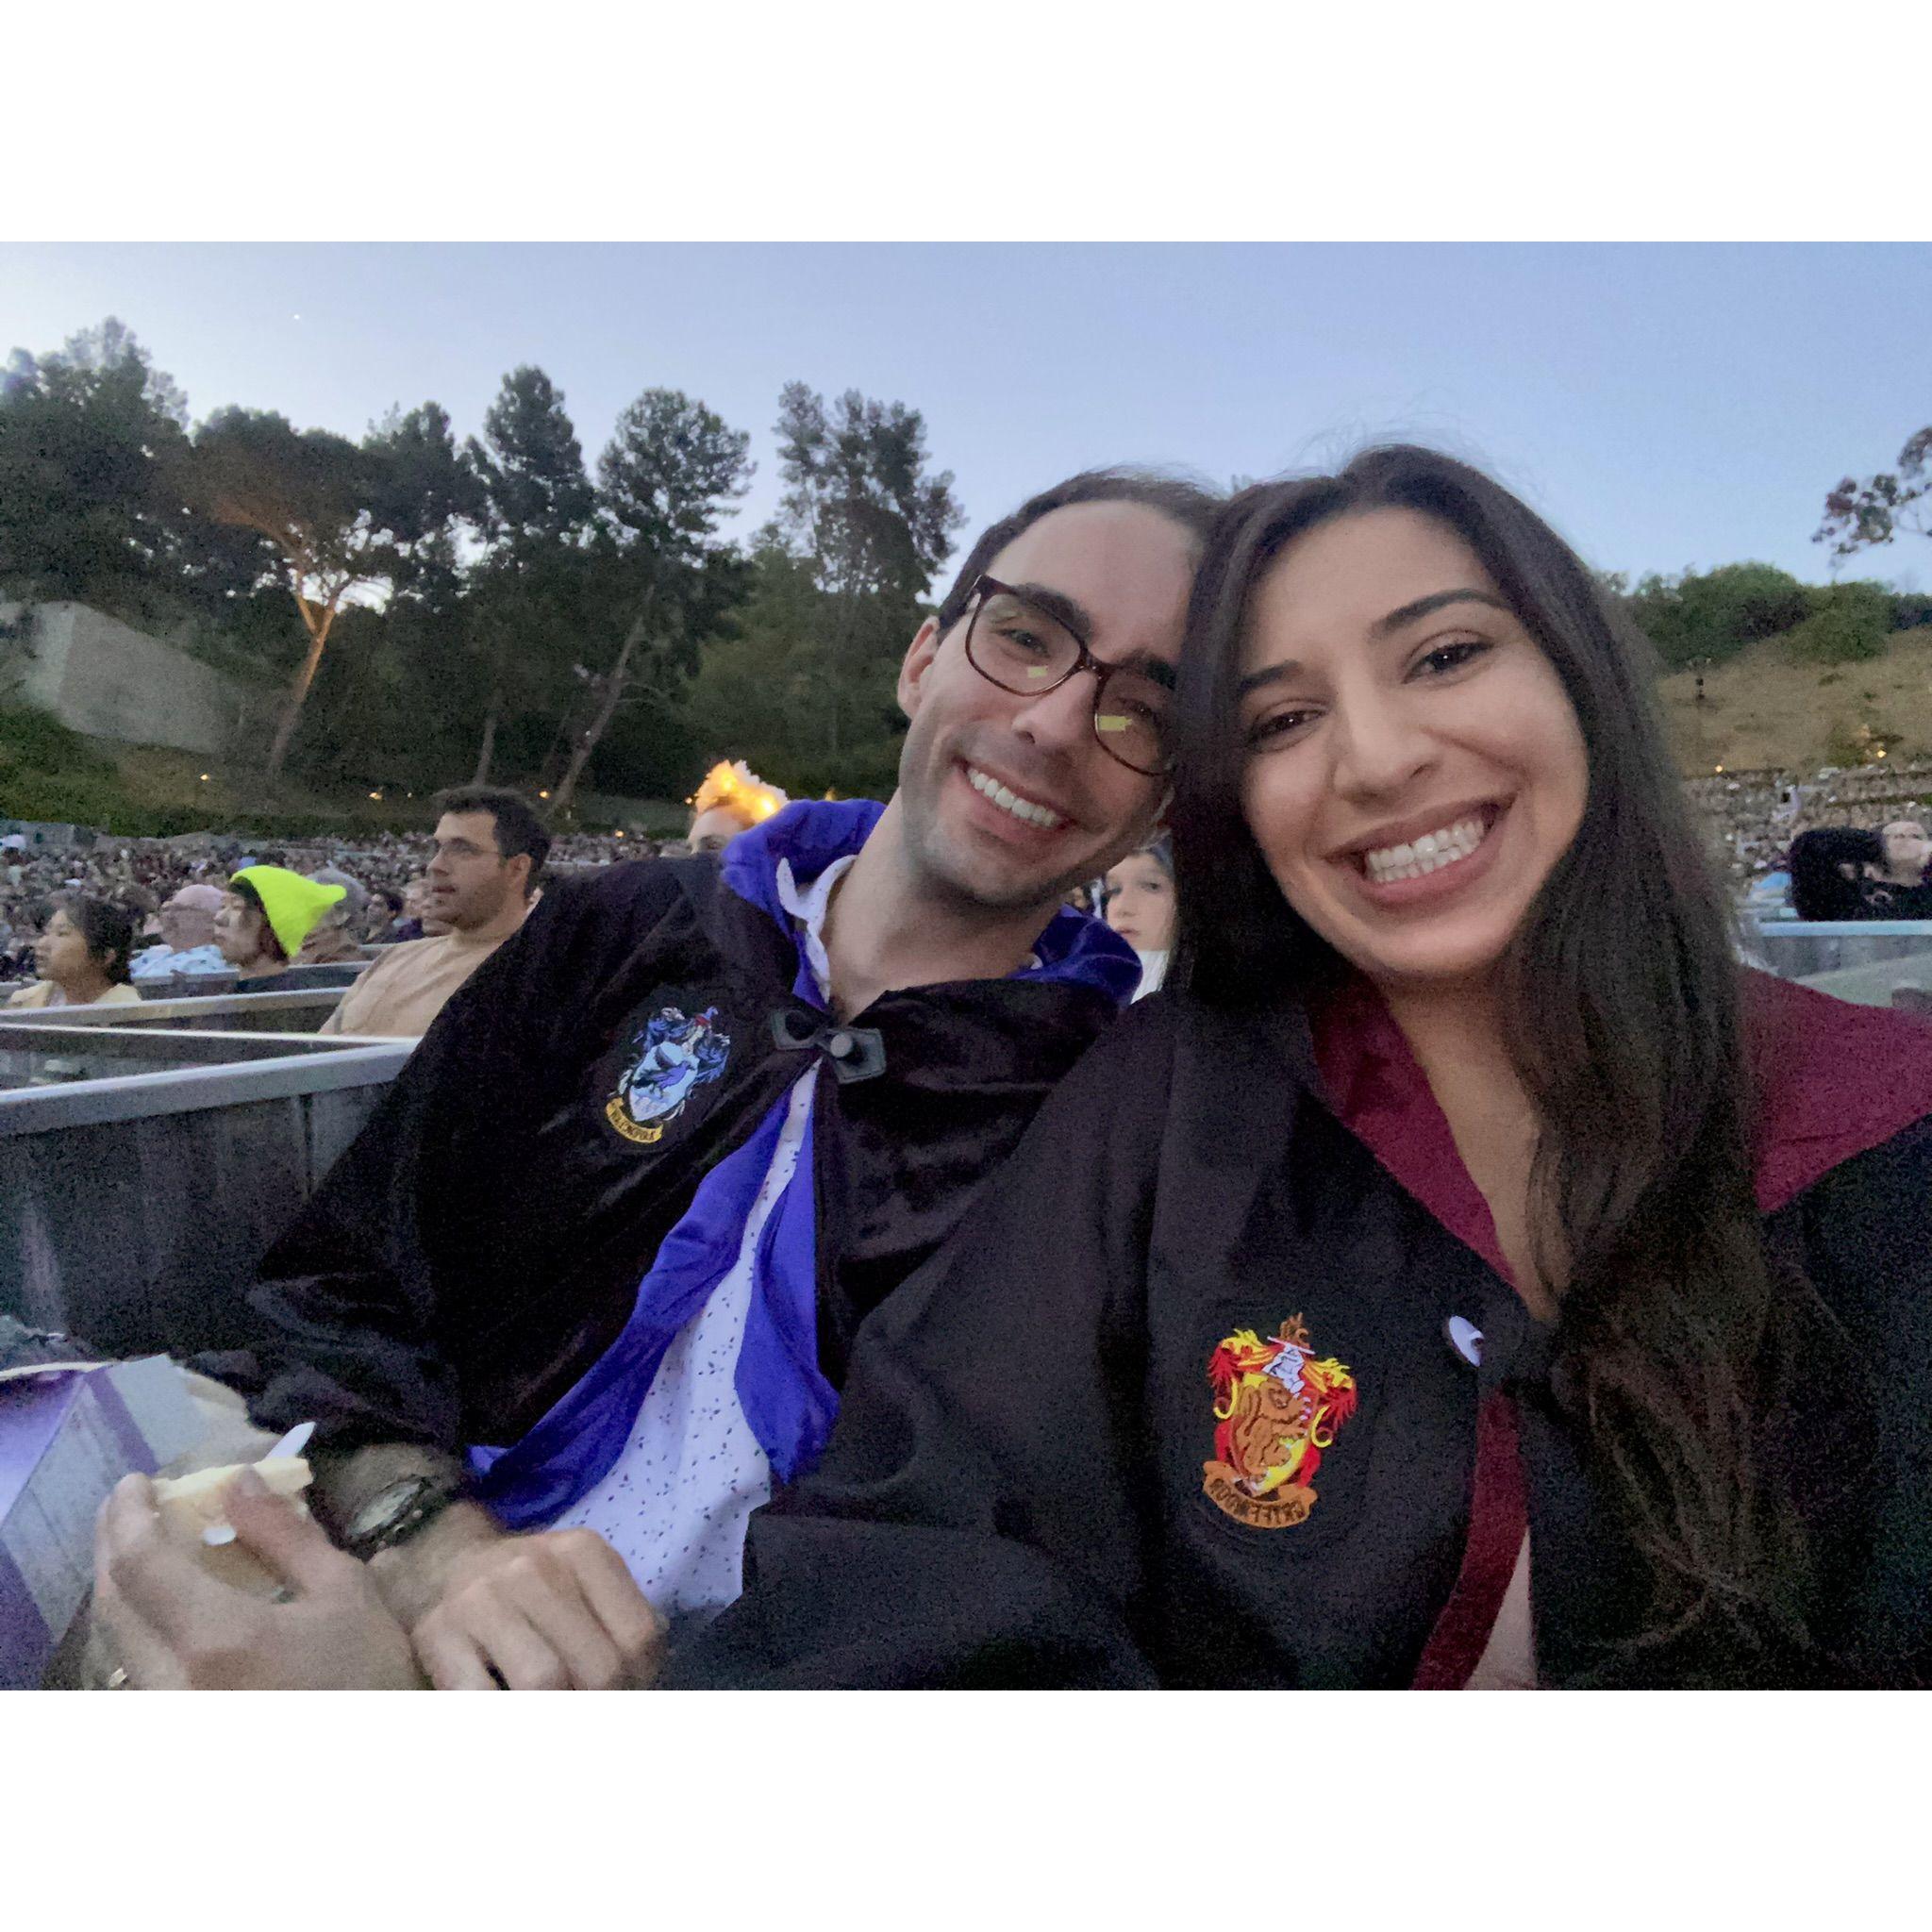 Harry Potter night at the Hollywood Bowl